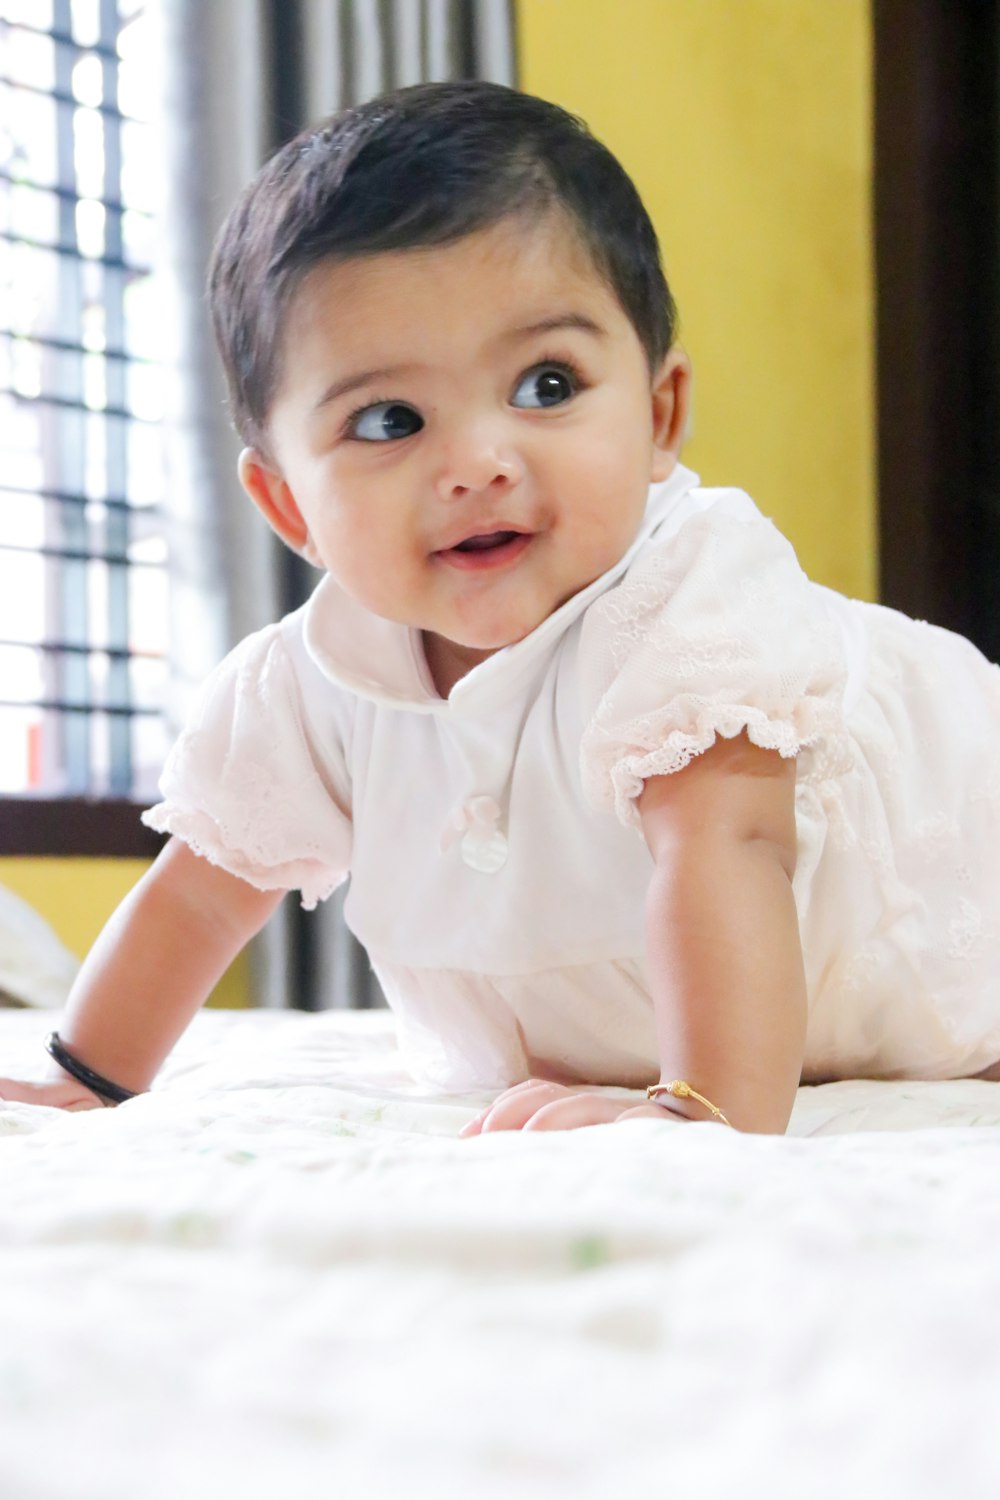 Collection of 999+ Adorable Baby Girl Photos – Breathtaking Full 4K Images